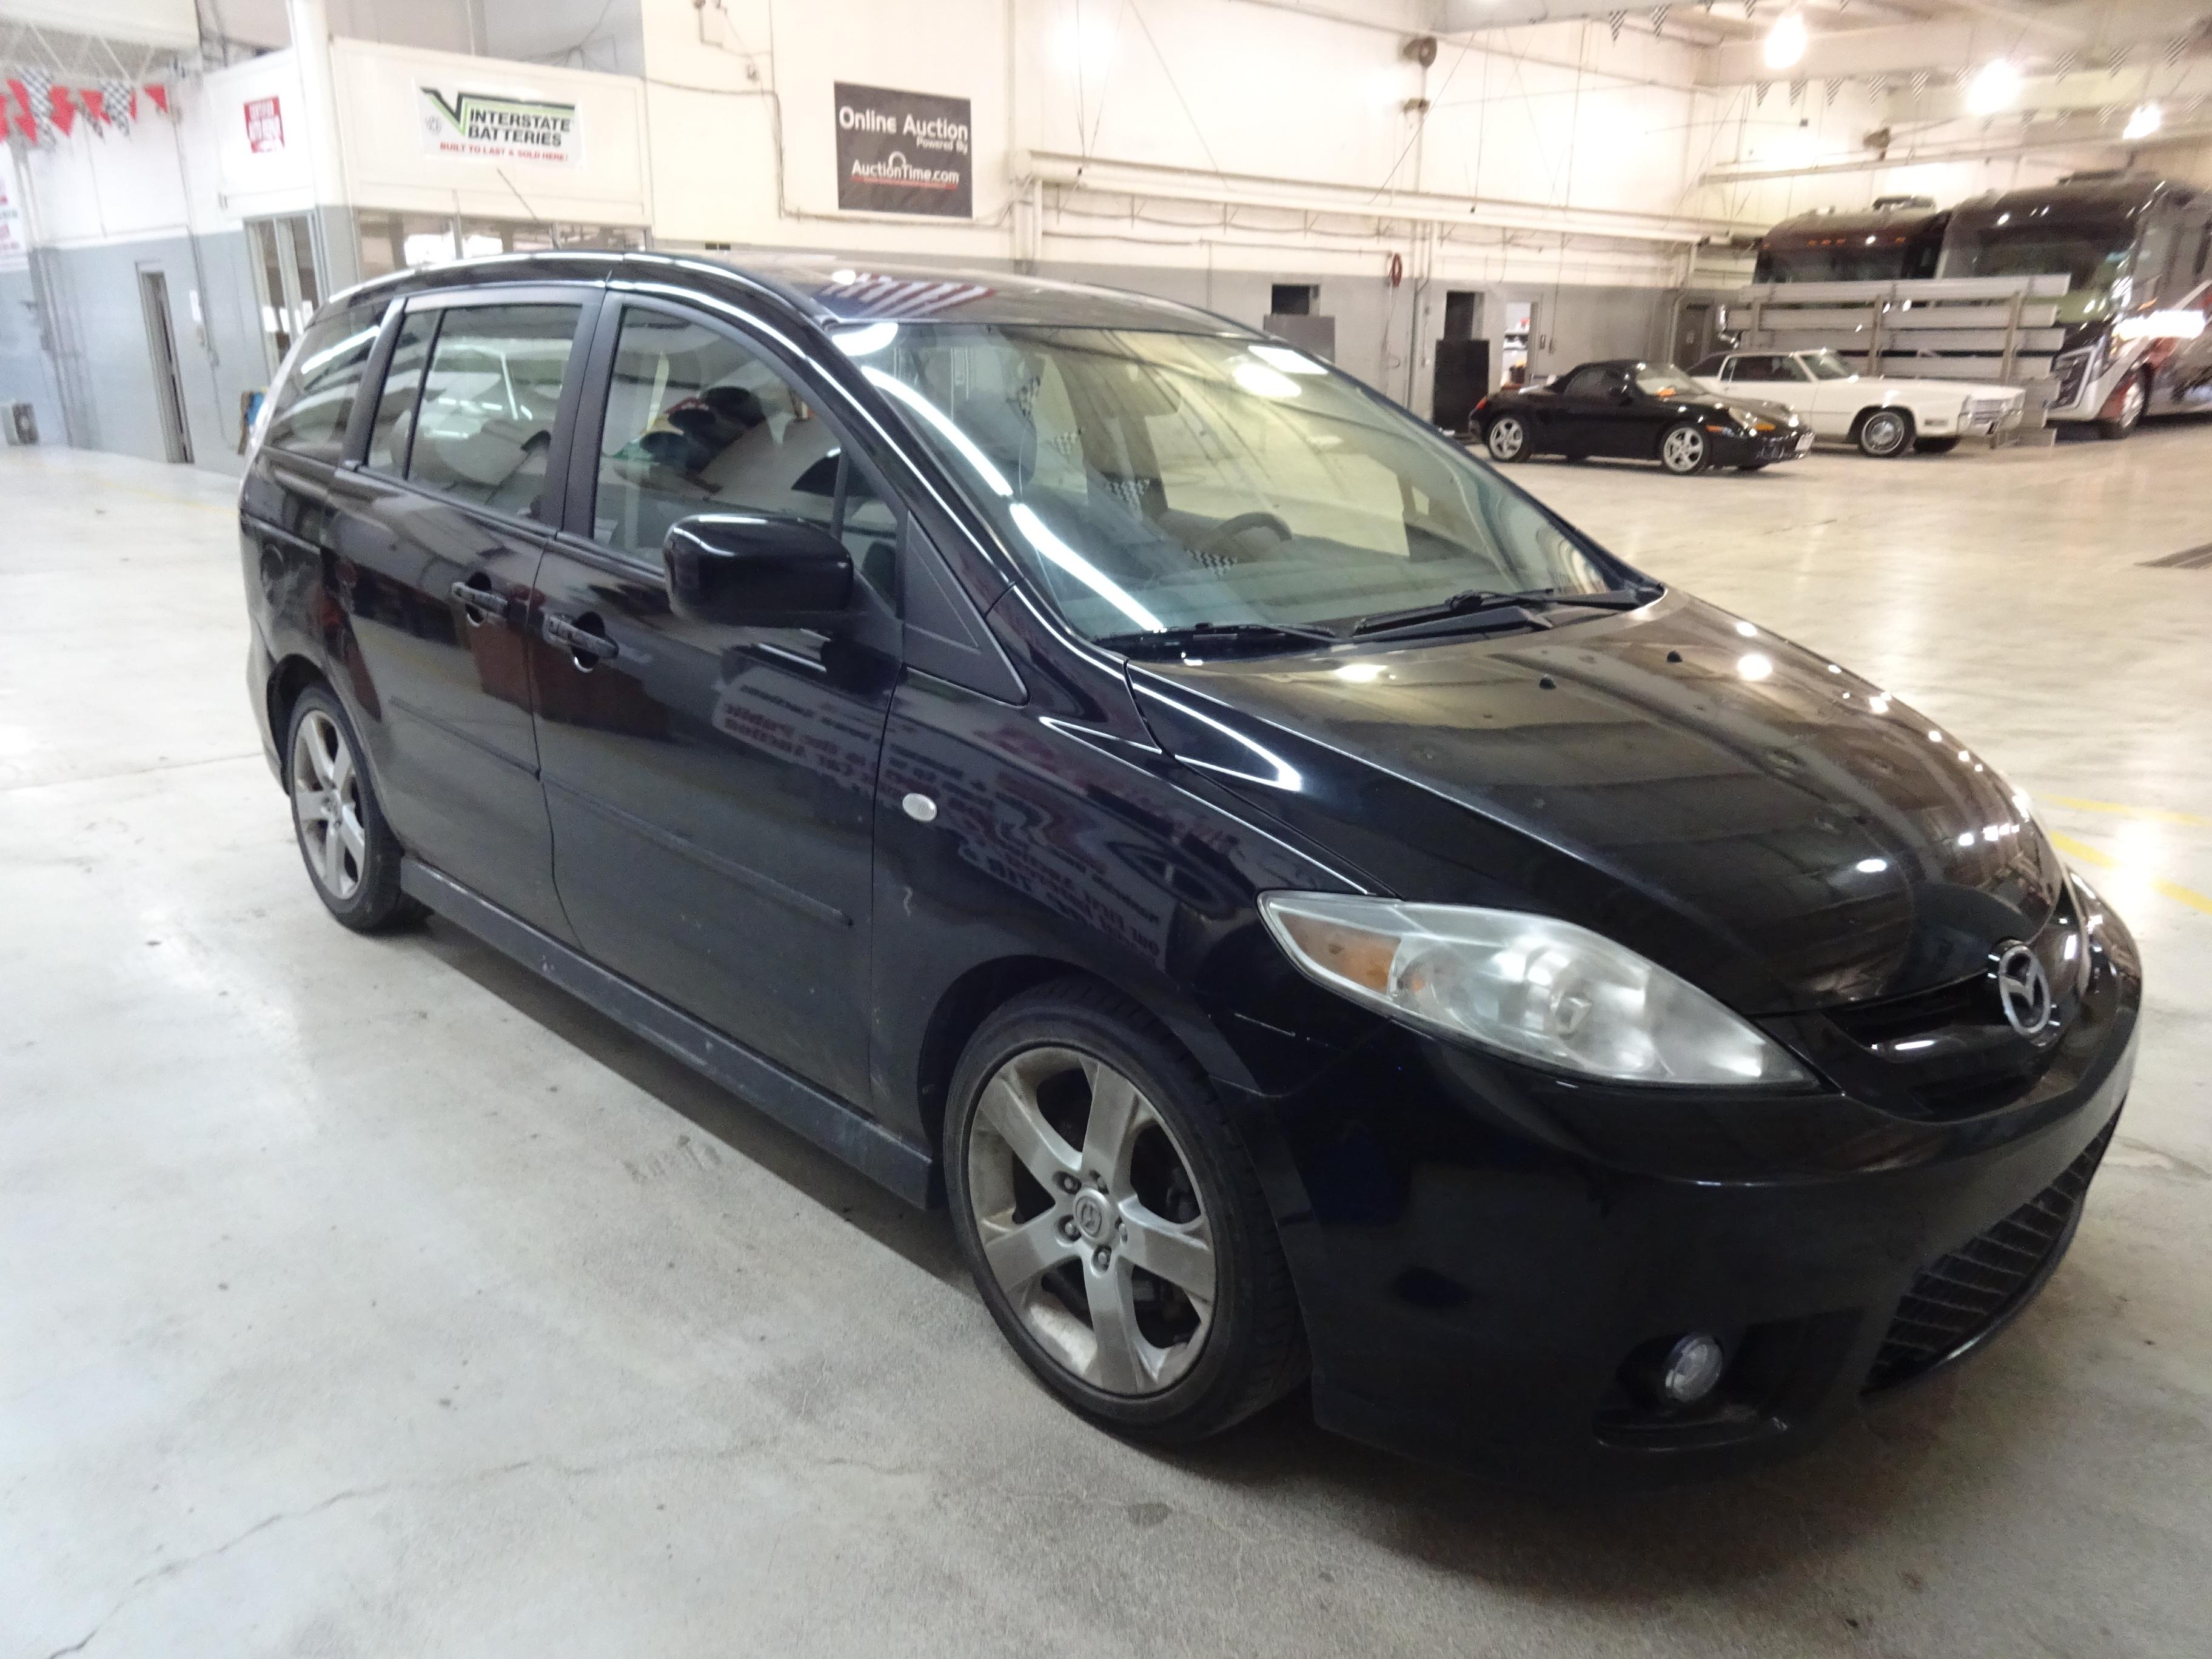 2007 MAZDA 5 5 DOOR TOURING 4 2.3 2WD AUTOMATIC